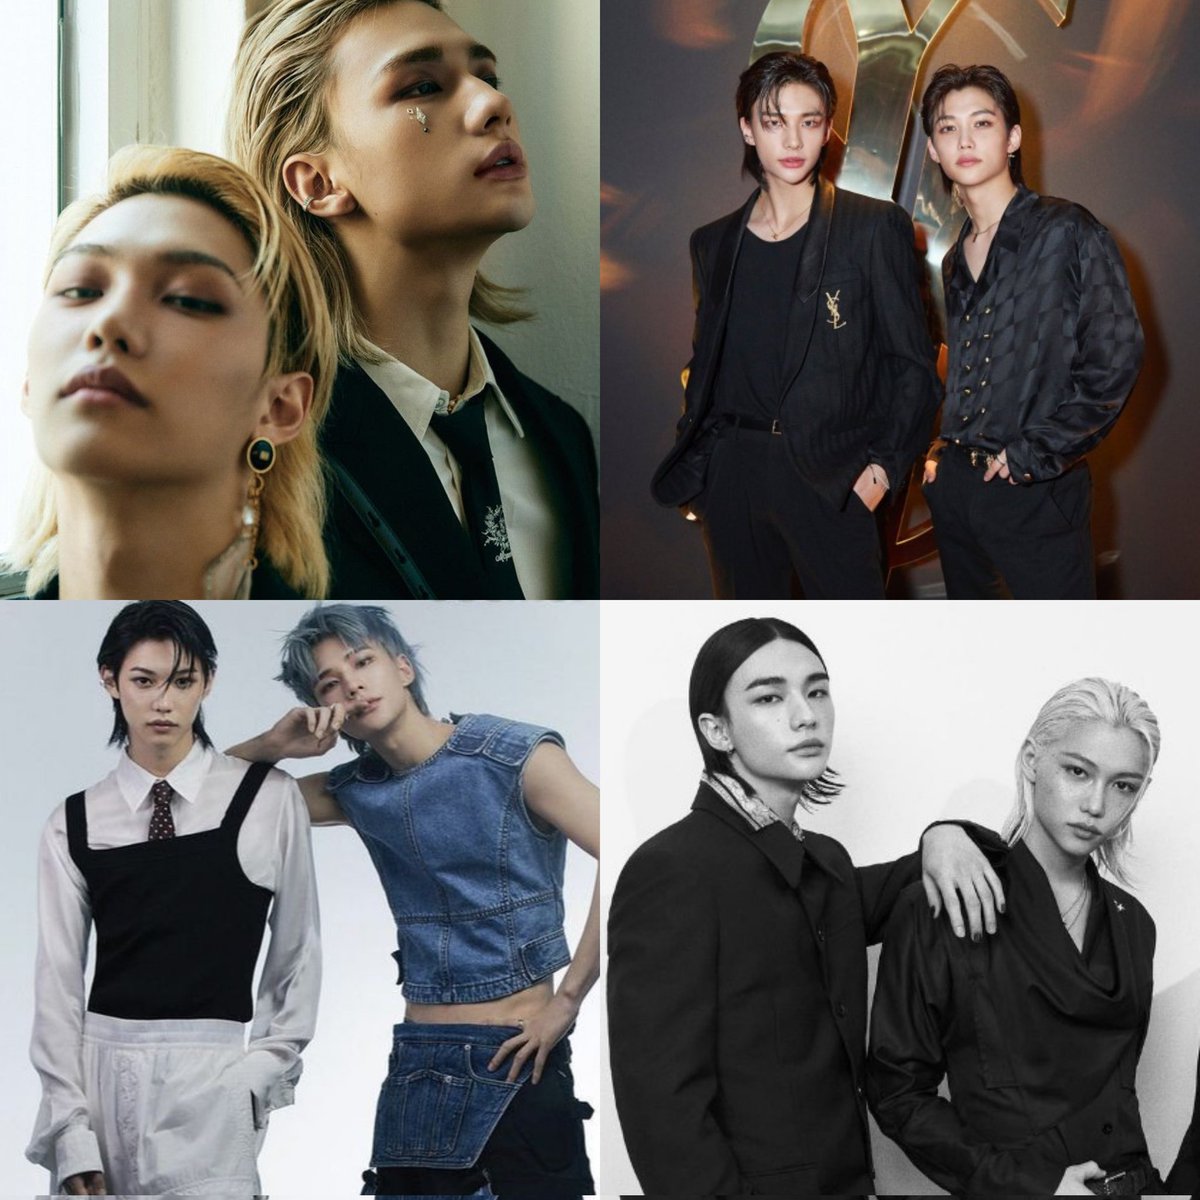 One day hyunjin & felix just decided to rule fashion industry and then never stopped